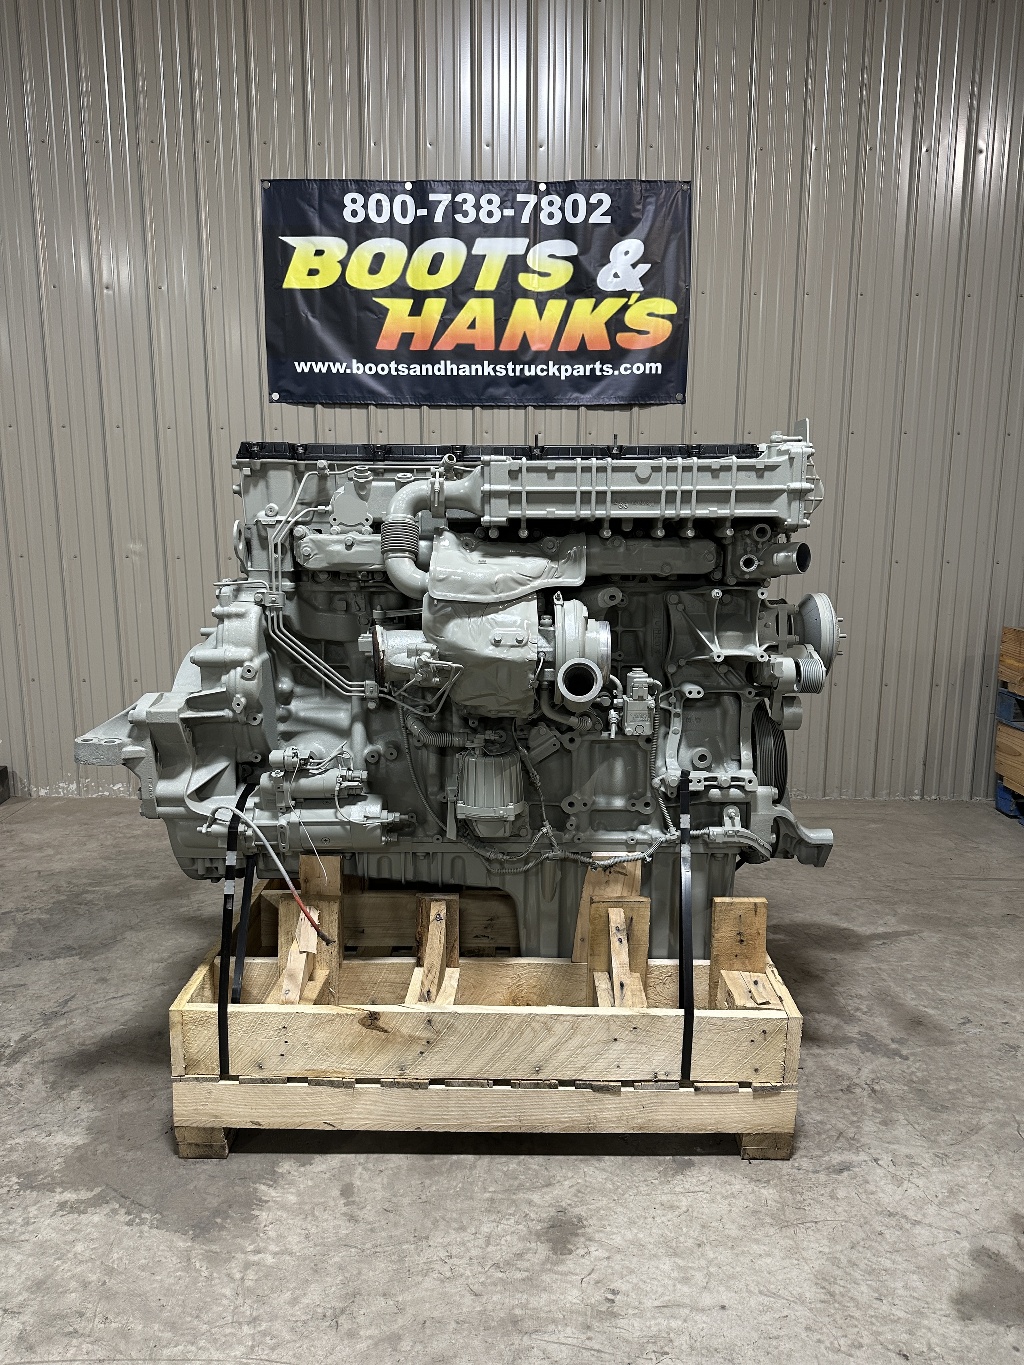 USED 2014 DETROIT DD13 COMPLETE ENGINE TRUCK PARTS #1972